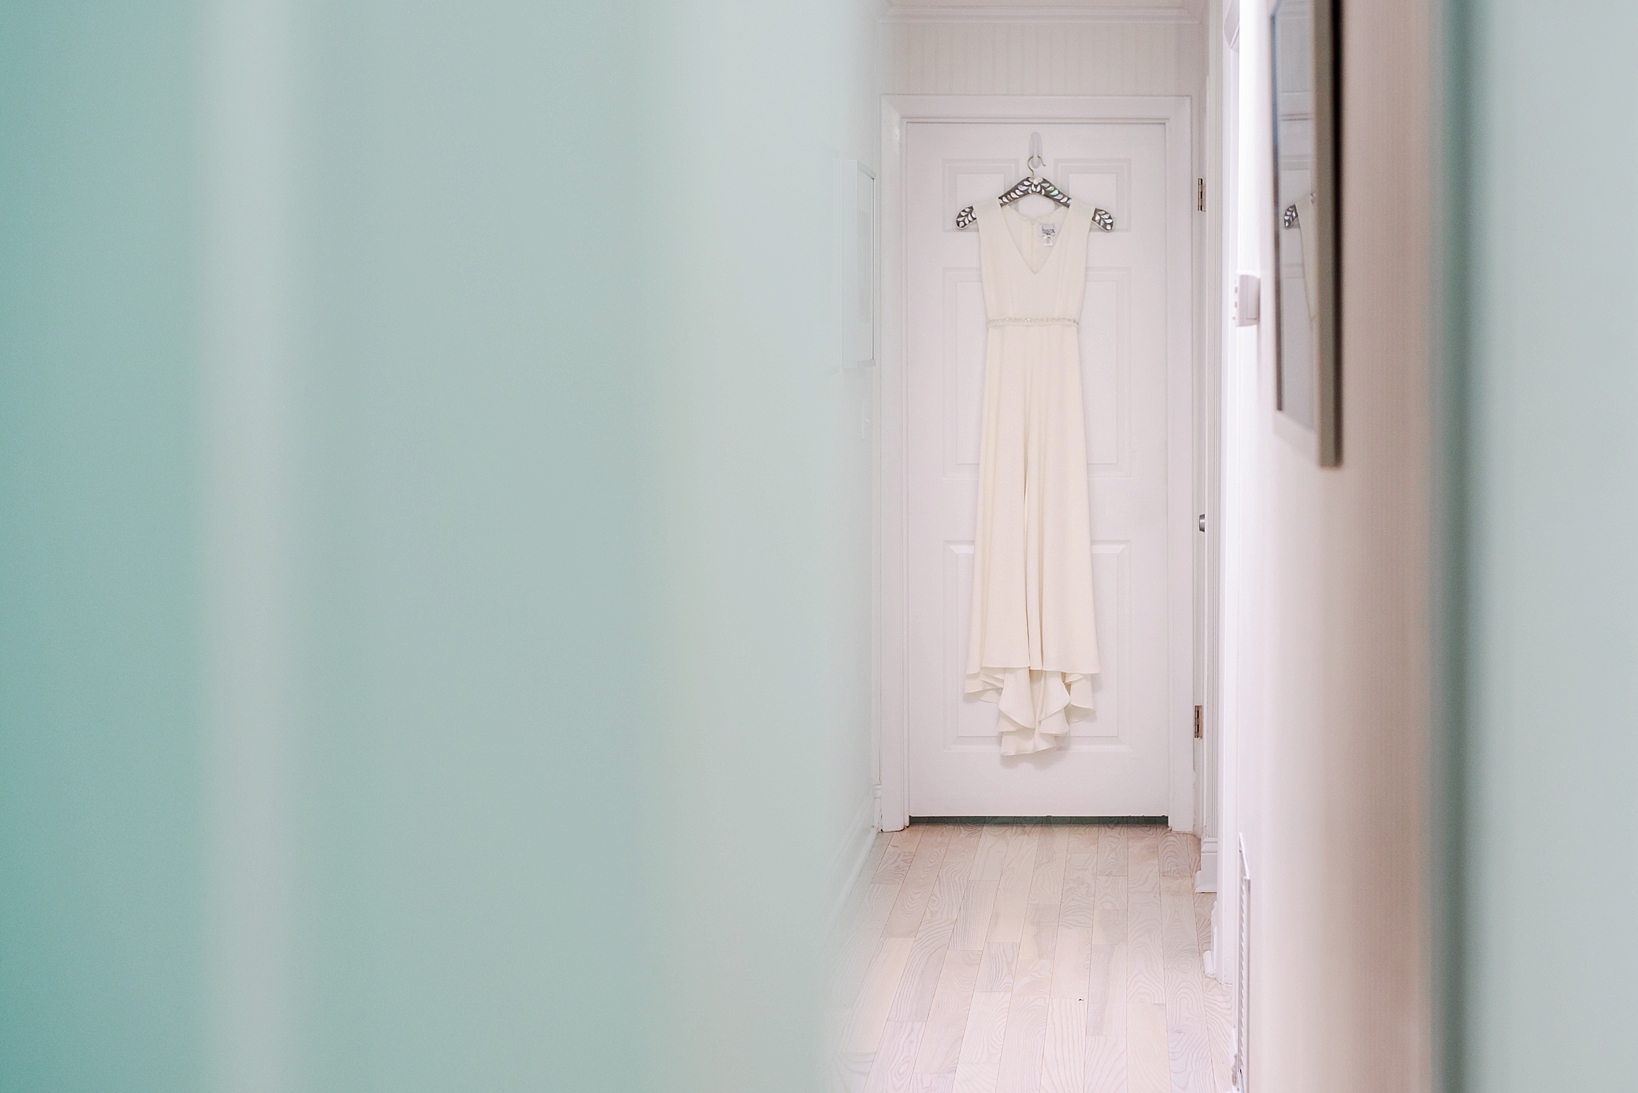 The wedding dress hanging near a turquoise wall 